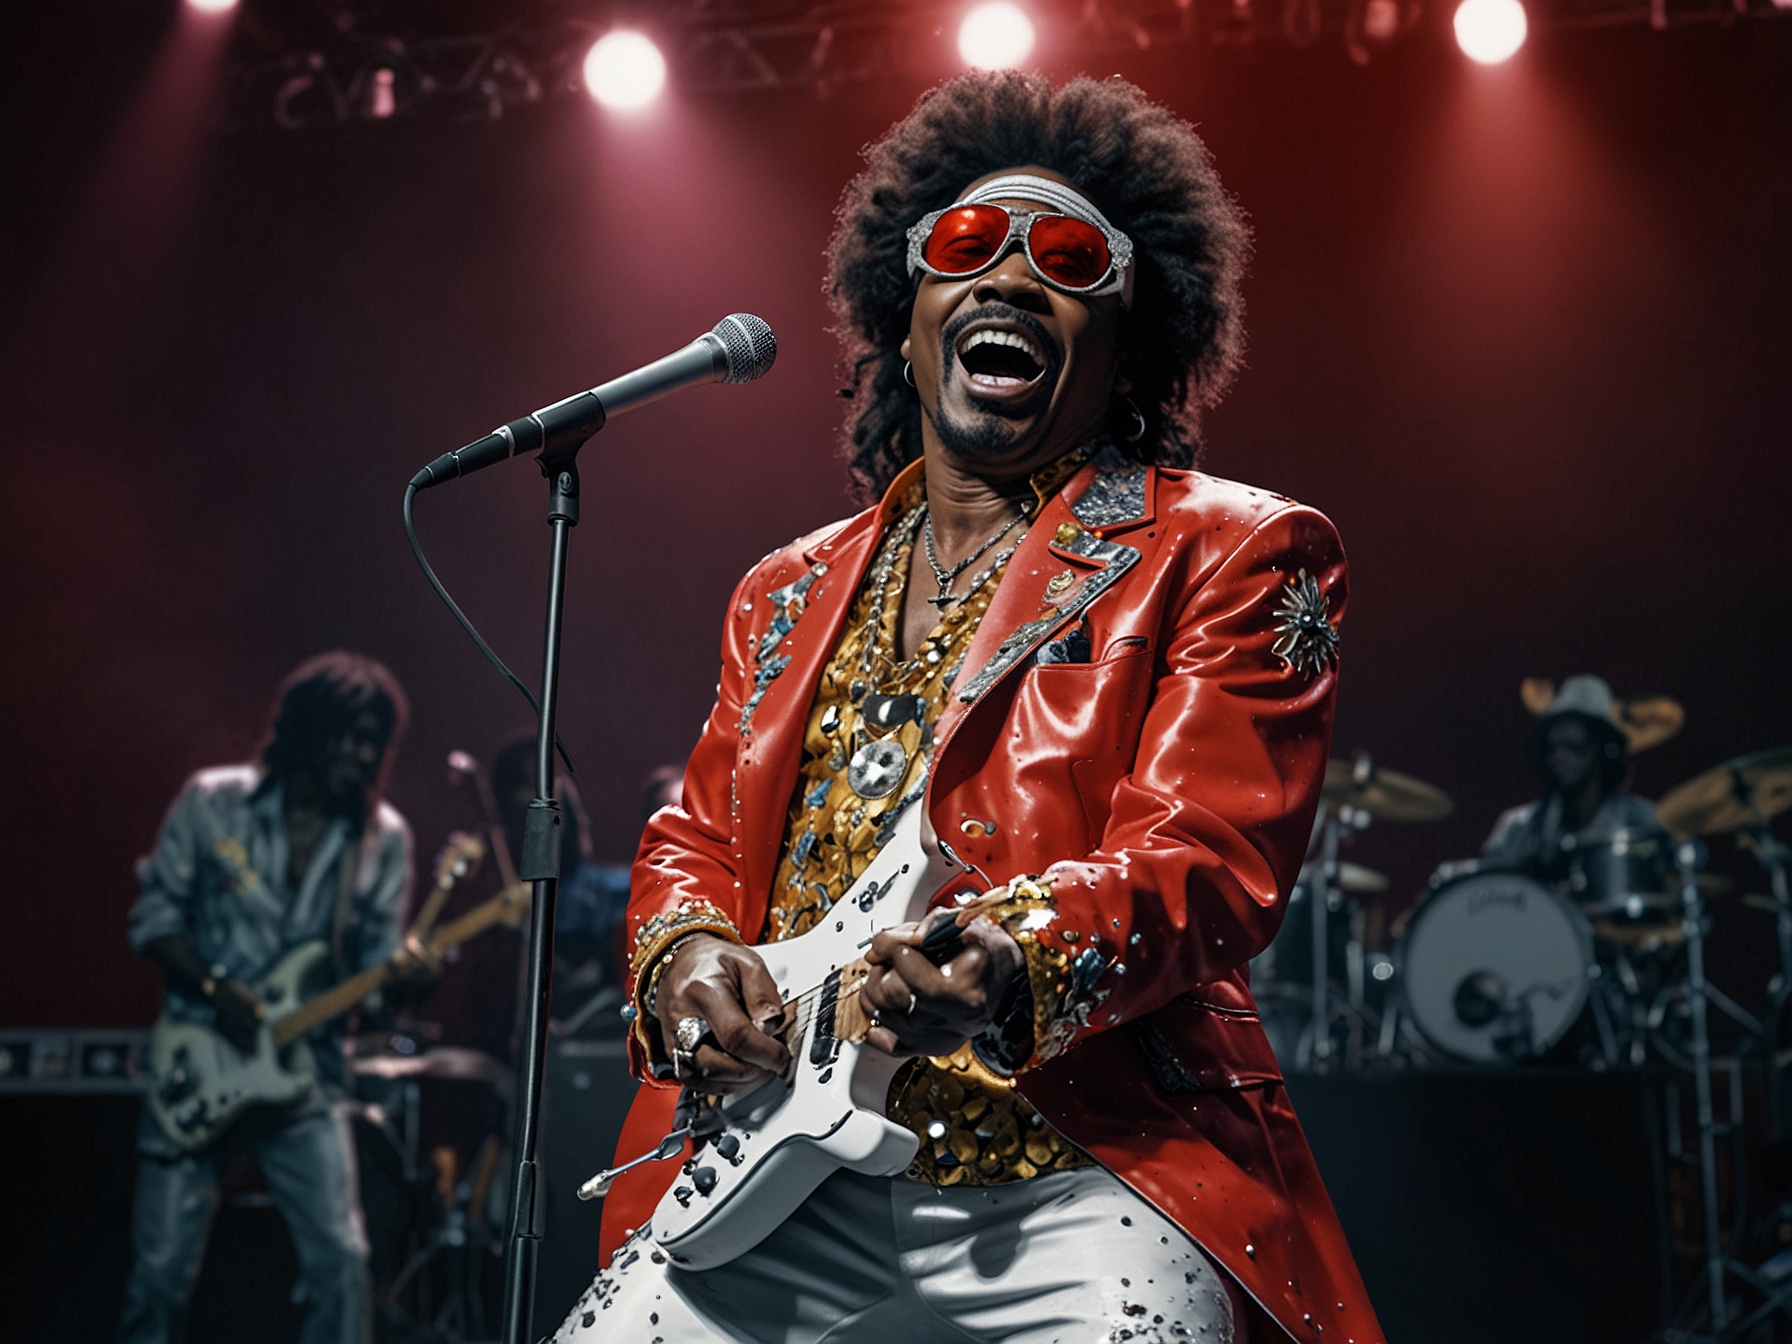 Bootsy Collins passionately performs on stage, his iconic star sunglasses and flamboyant costume capturing the essence of his funky persona and stage presence.